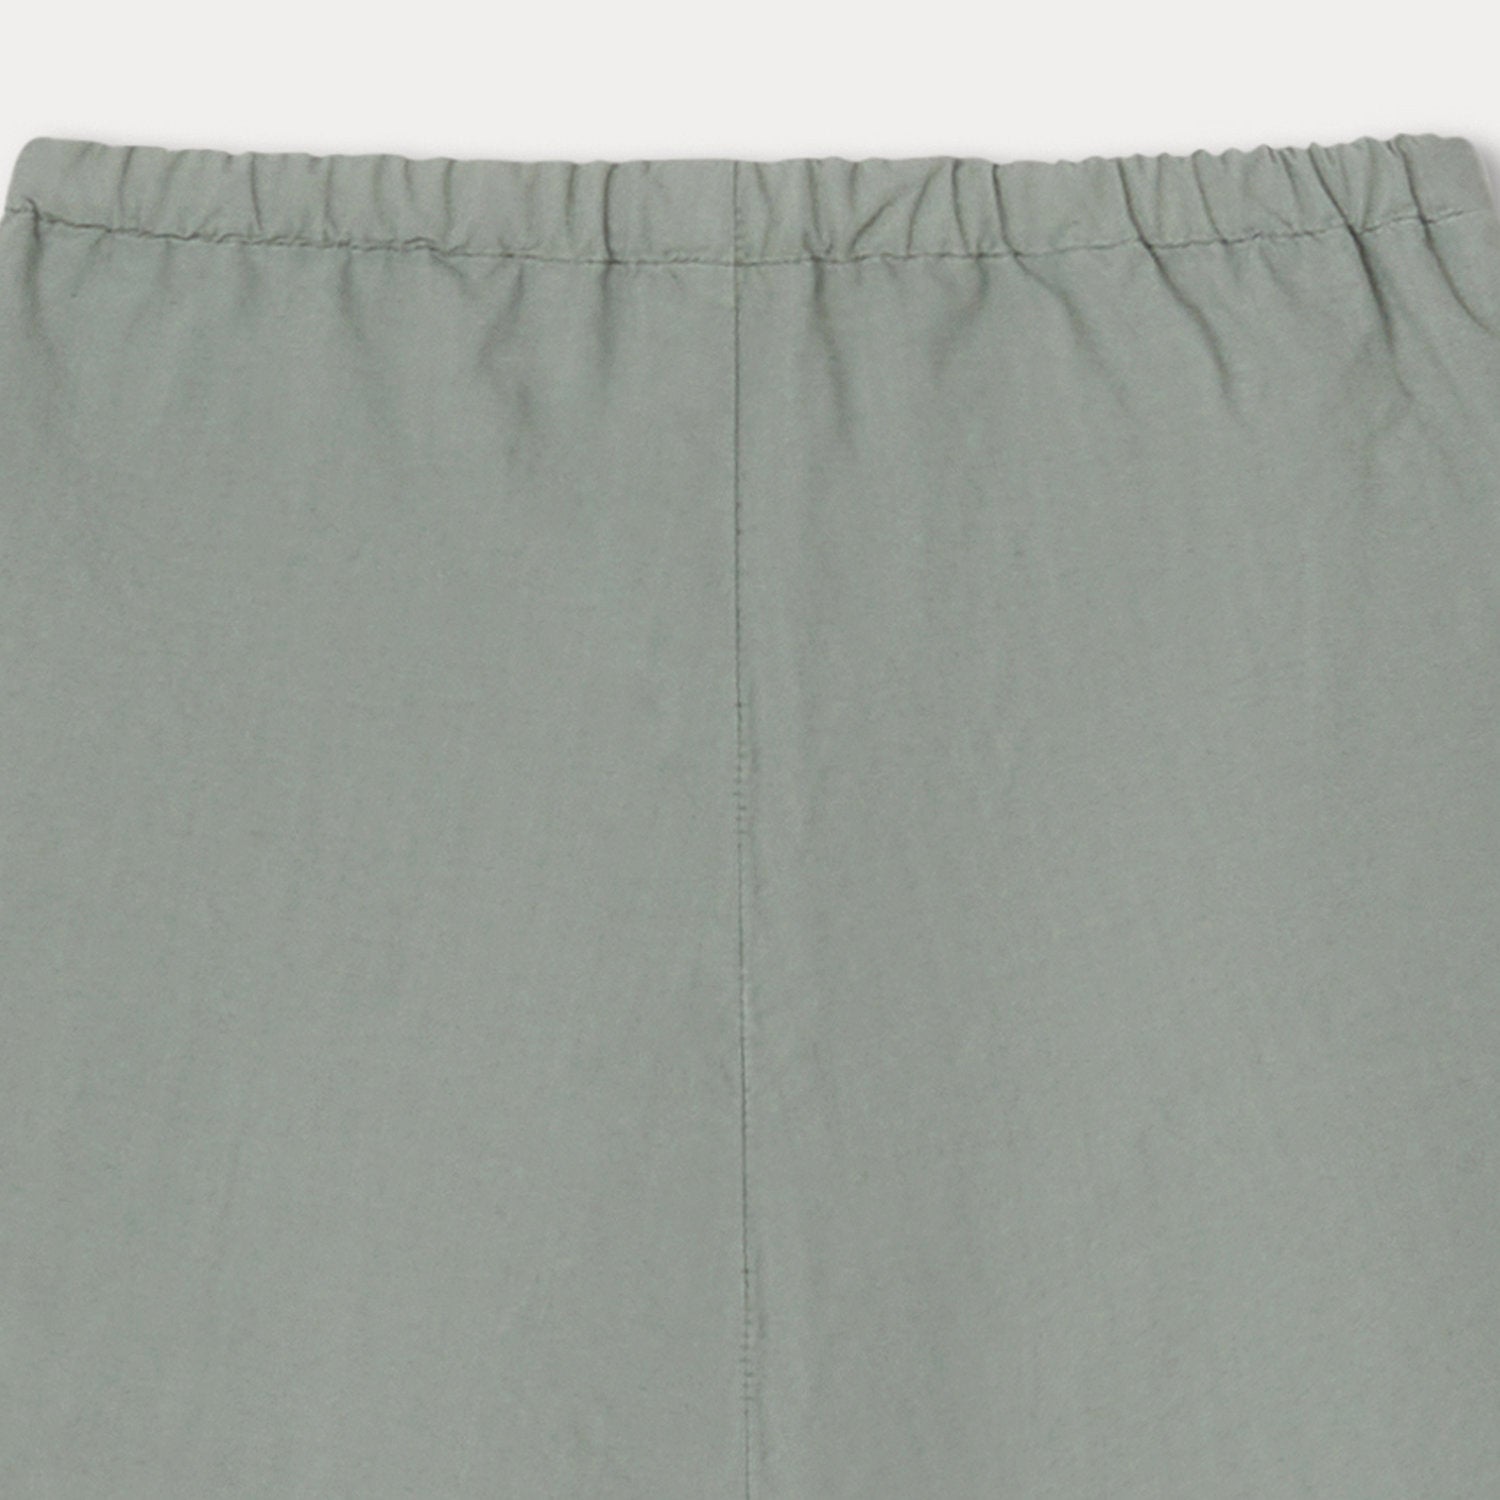 Baby Boys & Girls Green Cotton Trousers